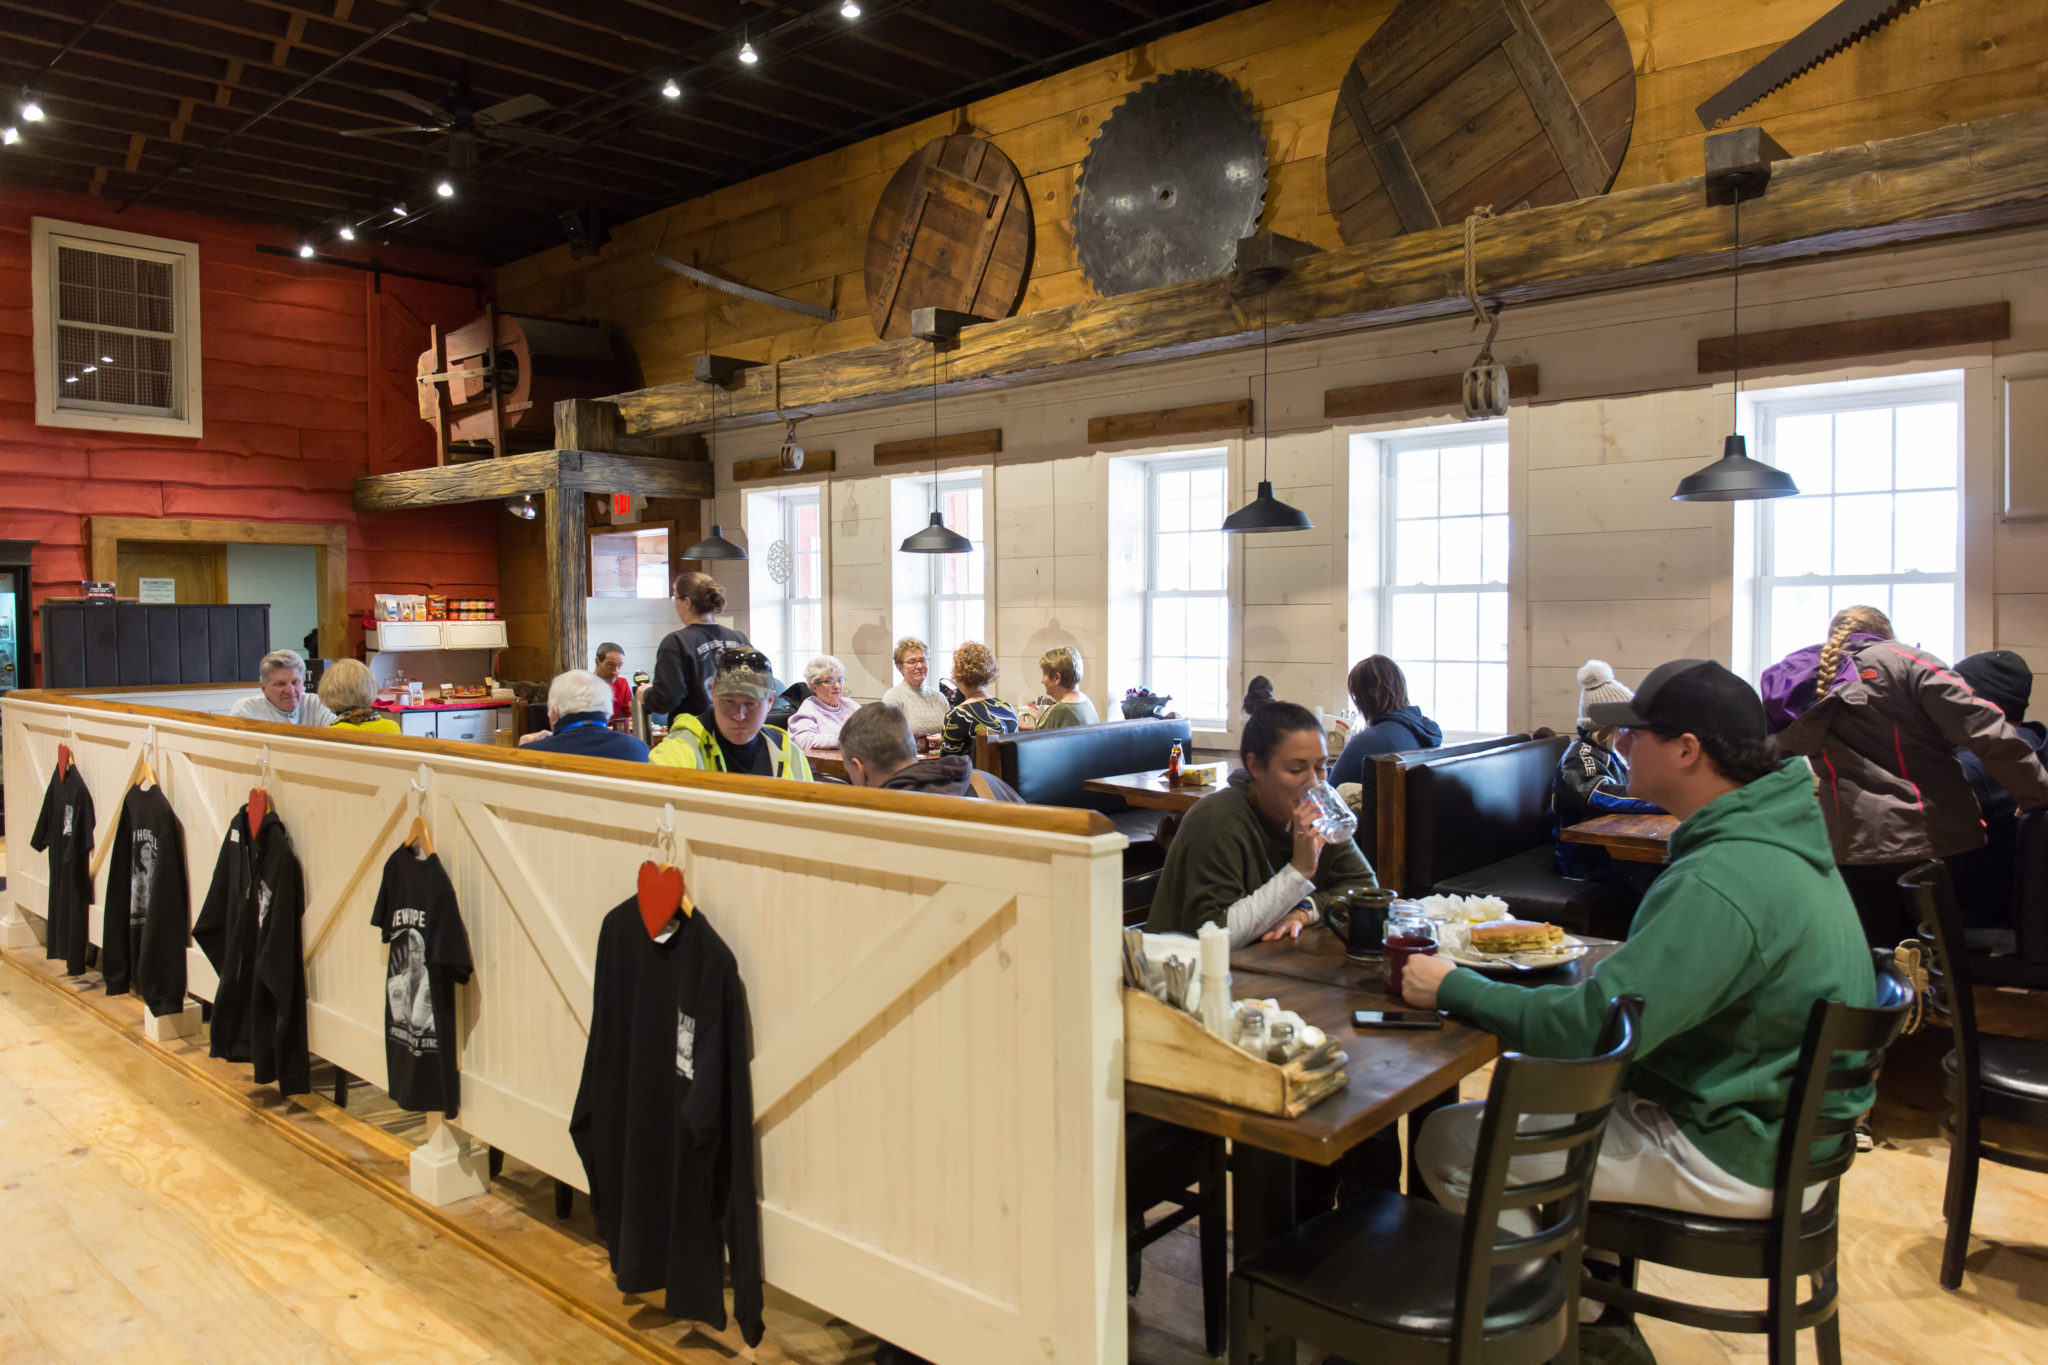 Photo New Hope Mills Cafe' and Store interior, with people sitting down eating